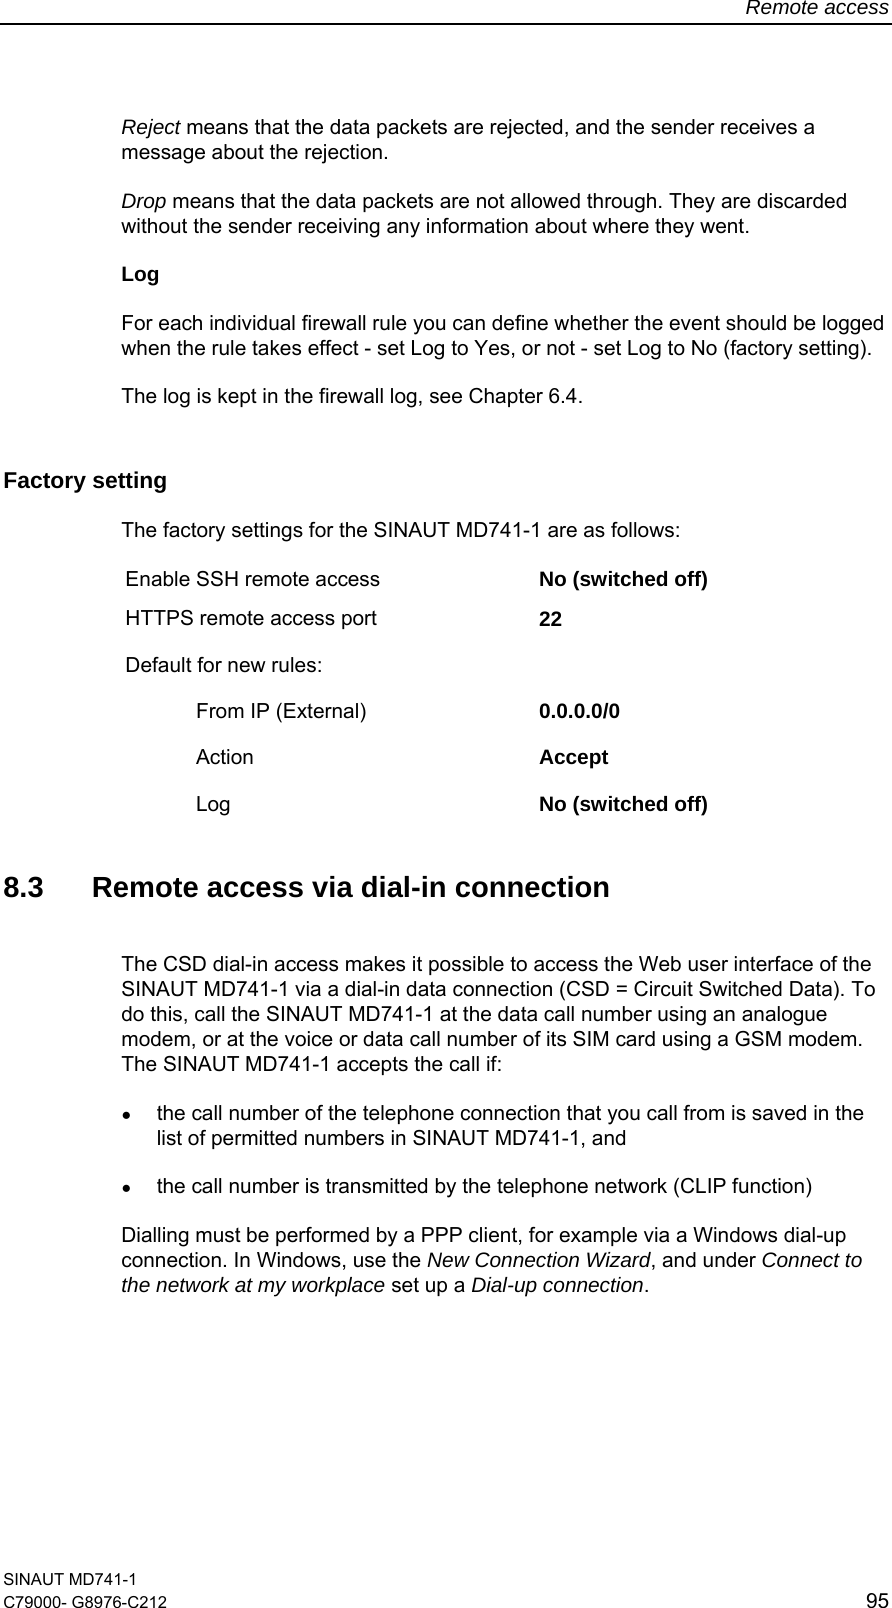 Remote access SINAUT MD741-1 C79000- G8976-C212  95  Reject means that the data packets are rejected, and the sender receives a message about the rejection.  Drop means that the data packets are not allowed through. They are discarded without the sender receiving any information about where they went. Log For each individual firewall rule you can define whether the event should be logged when the rule takes effect - set Log to Yes, or not - set Log to No (factory setting). The log is kept in the firewall log, see Chapter 6.4. Factory setting  The factory settings for the SINAUT MD741-1 are as follows: Enable SSH remote access  No (switched off) HTTPS remote access port  22 Default for new rules:     From IP (External)  0.0.0.0/0  Action  Accept   Log  No (switched off)  8.3  Remote access via dial-in connection The CSD dial-in access makes it possible to access the Web user interface of the SINAUT MD741-1 via a dial-in data connection (CSD = Circuit Switched Data). To do this, call the SINAUT MD741-1 at the data call number using an analogue modem, or at the voice or data call number of its SIM card using a GSM modem. The SINAUT MD741-1 accepts the call if: ● the call number of the telephone connection that you call from is saved in the list of permitted numbers in SINAUT MD741-1, and  ● the call number is transmitted by the telephone network (CLIP function)  Dialling must be performed by a PPP client, for example via a Windows dial-up connection. In Windows, use the New Connection Wizard, and under Connect to the network at my workplace set up a Dial-up connection.  